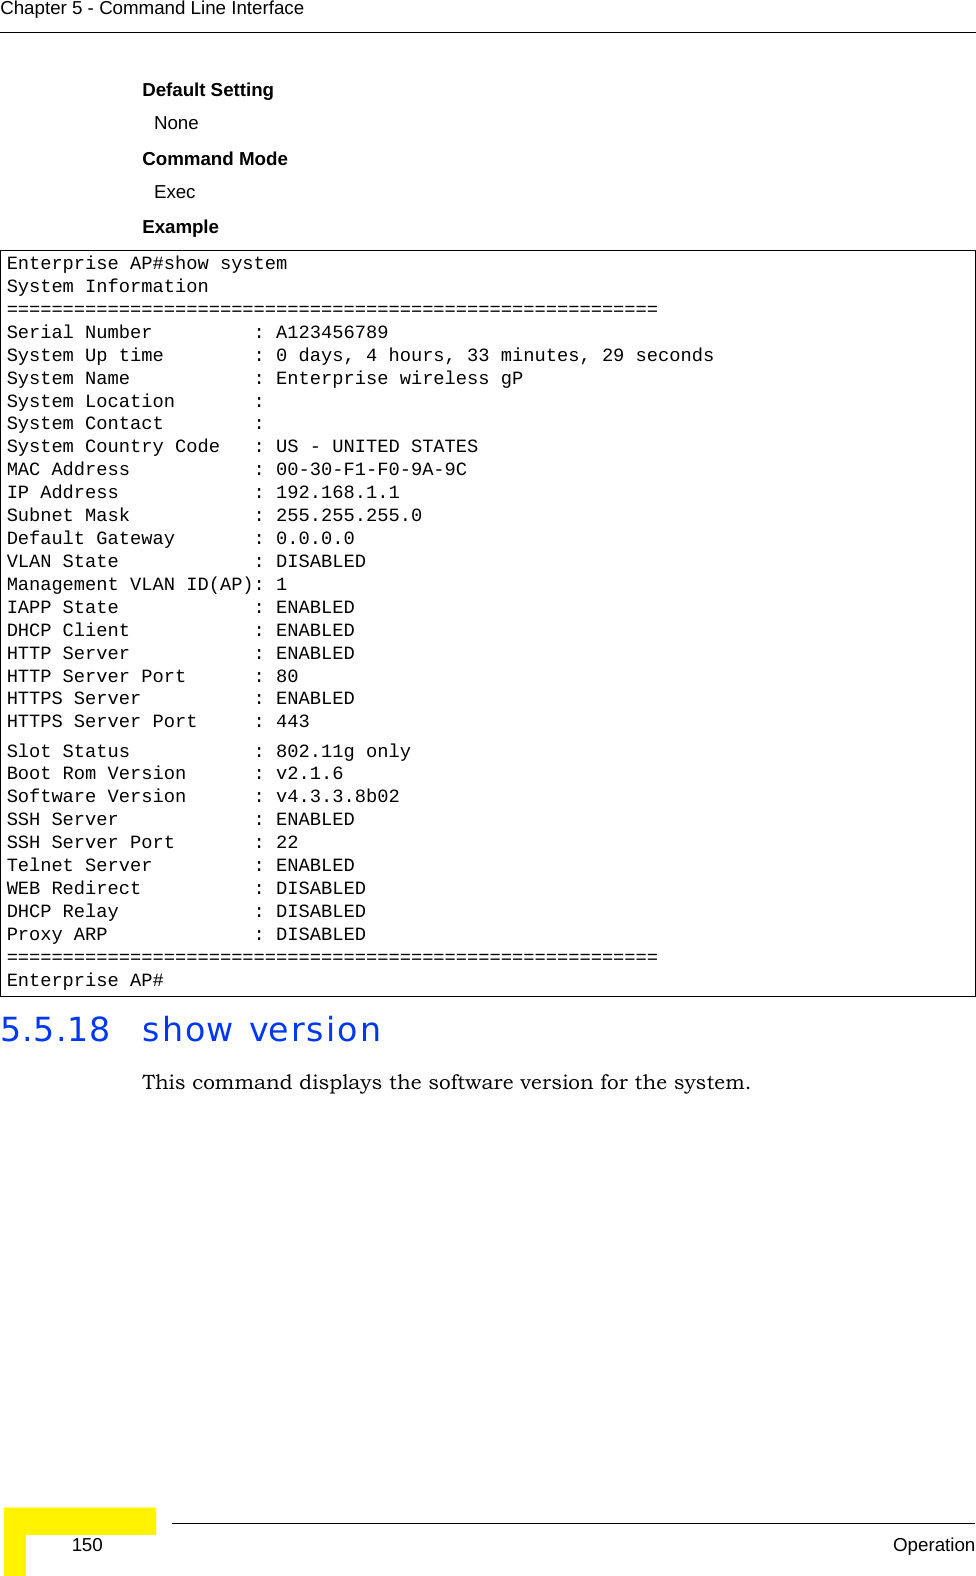  150 OperationChapter 5 - Command Line InterfaceDefault SettingNoneCommand Mode ExecExample5.5.18 show versionThis command displays the software version for the system.Enterprise AP#show systemSystem Information==========================================================Serial Number         : A123456789System Up time        : 0 days, 4 hours, 33 minutes, 29 secondsSystem Name           : Enterprise wireless gPSystem Location       :System Contact        :System Country Code   : US - UNITED STATESMAC Address           : 00-30-F1-F0-9A-9CIP Address            : 192.168.1.1Subnet Mask           : 255.255.255.0Default Gateway       : 0.0.0.0VLAN State            : DISABLEDManagement VLAN ID(AP): 1IAPP State            : ENABLEDDHCP Client           : ENABLEDHTTP Server           : ENABLEDHTTP Server Port      : 80HTTPS Server          : ENABLEDHTTPS Server Port     : 443Slot Status           : 802.11g onlyBoot Rom Version      : v2.1.6Software Version      : v4.3.3.8b02SSH Server            : ENABLEDSSH Server Port       : 22Telnet Server         : ENABLEDWEB Redirect          : DISABLEDDHCP Relay            : DISABLEDProxy ARP             : DISABLED==========================================================Enterprise AP#